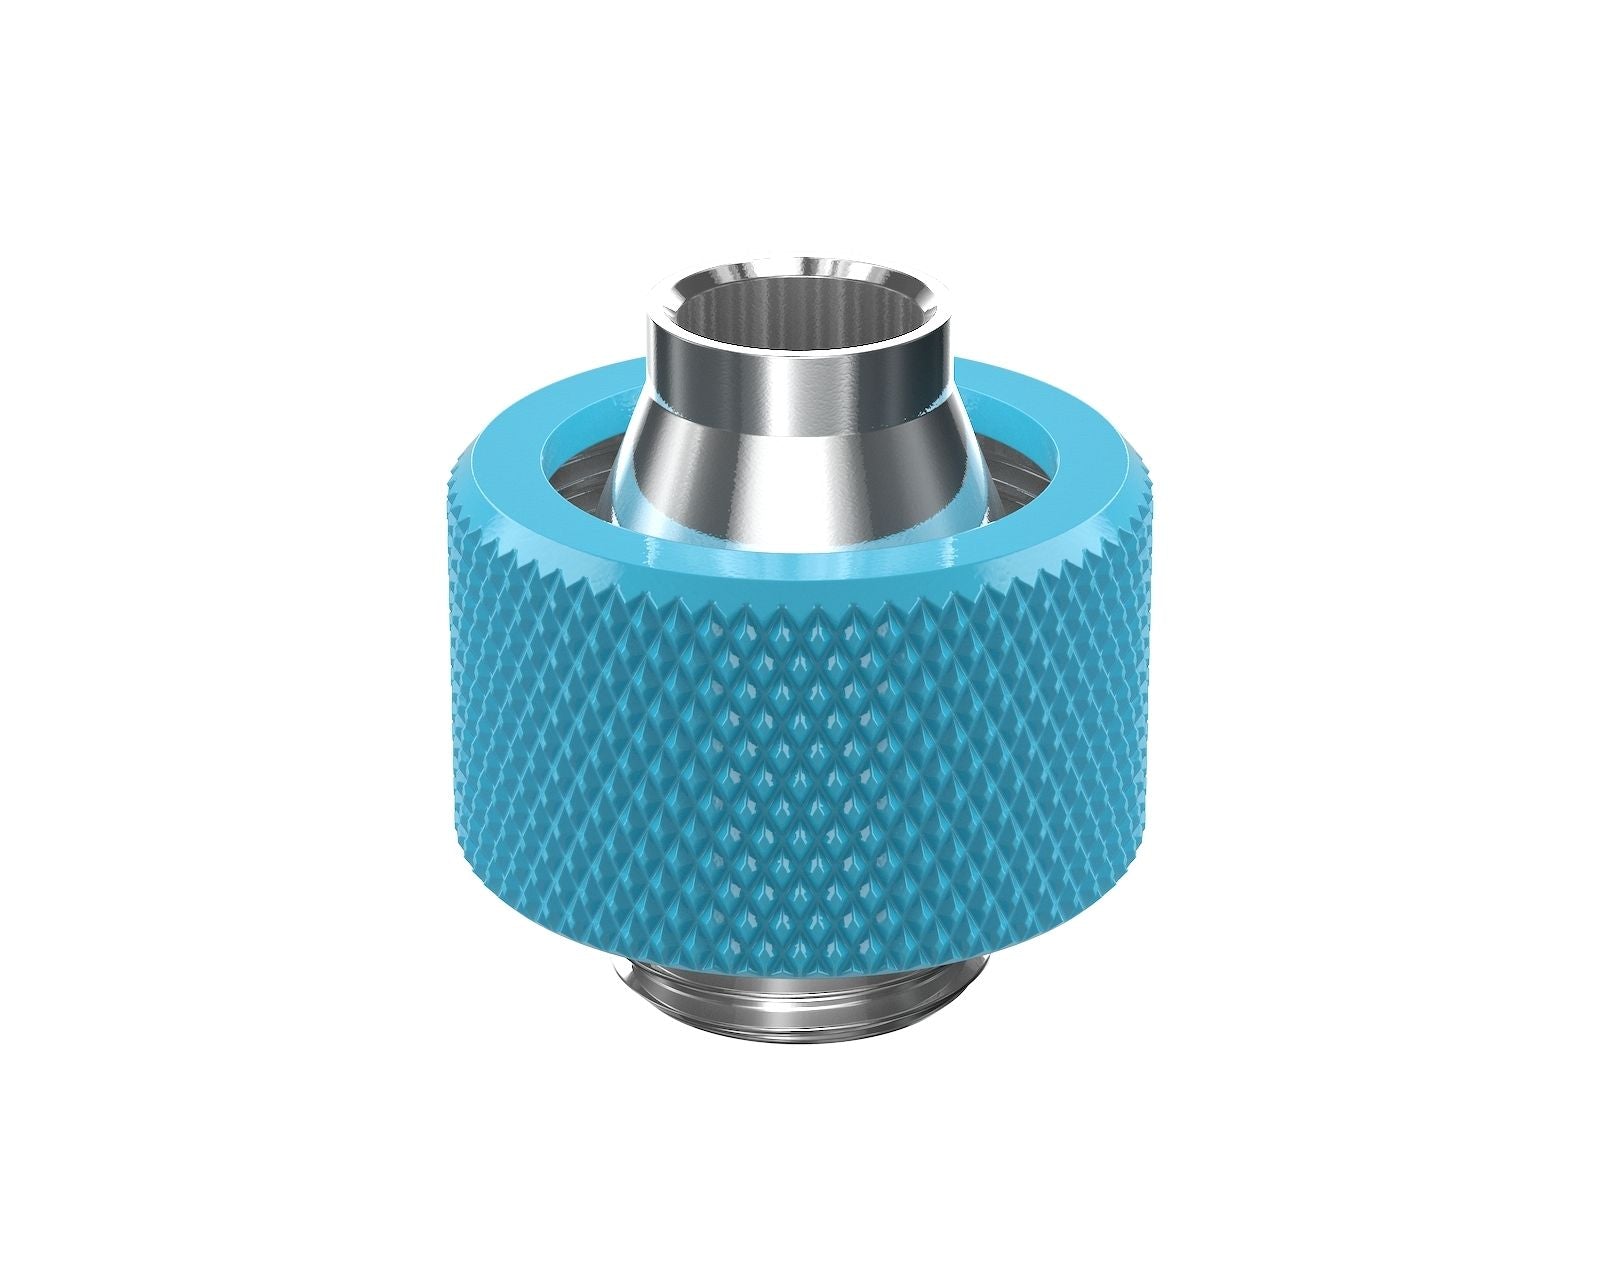 PrimoChill SecureFit SX - Premium Compression Fitting For 3/8in ID x 5/8in OD Flexible Tubing (F-SFSX58) - Available in 20+ Colors, Custom Watercooling Loop Ready - Sky Blue